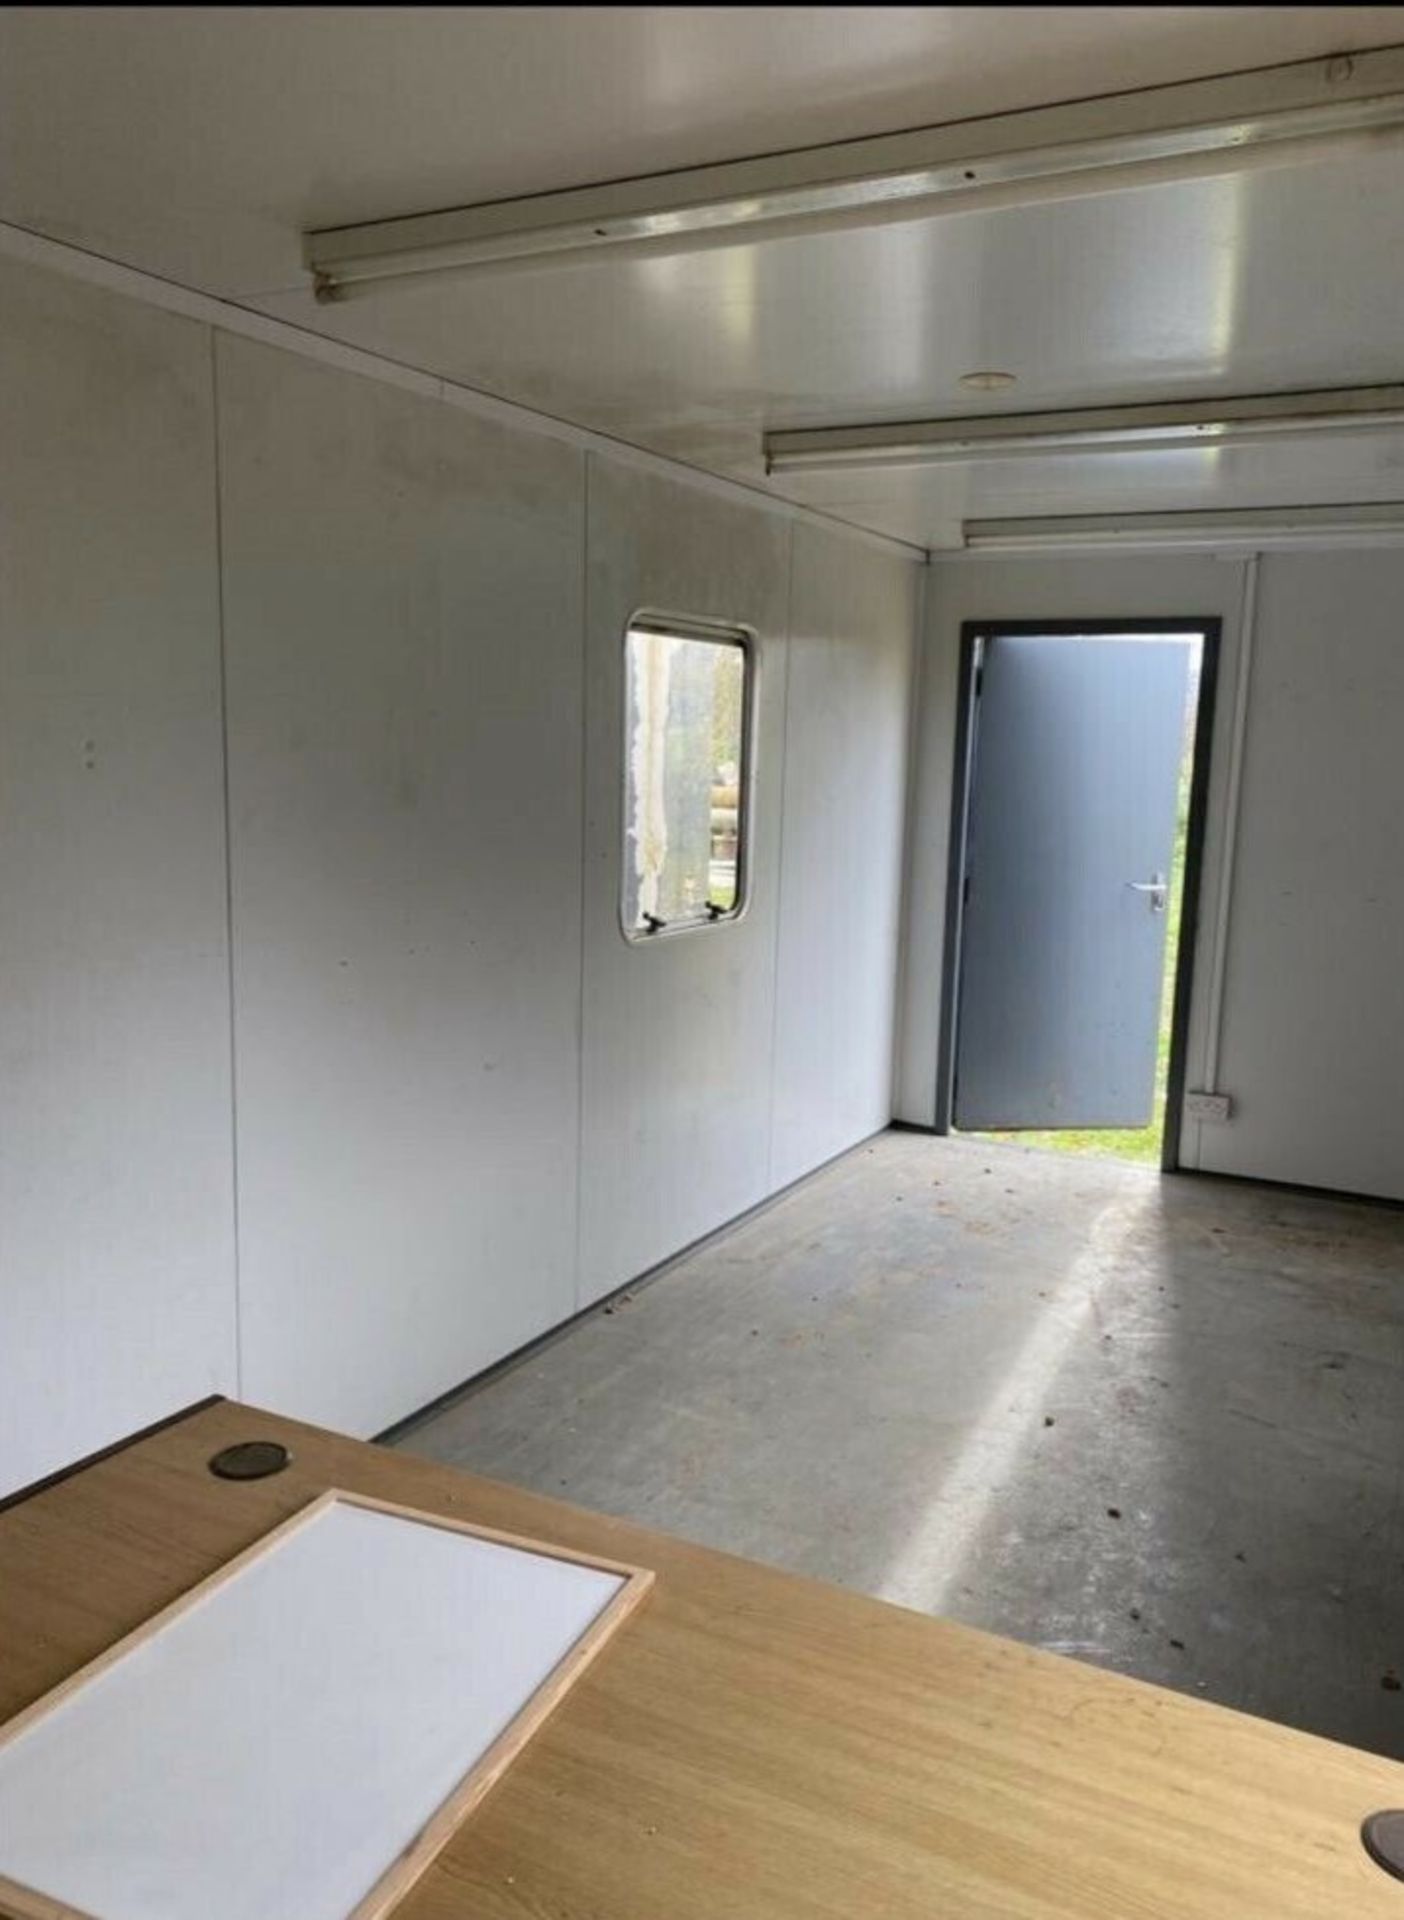 20ft Site Office, Staffroom - Image 7 of 8